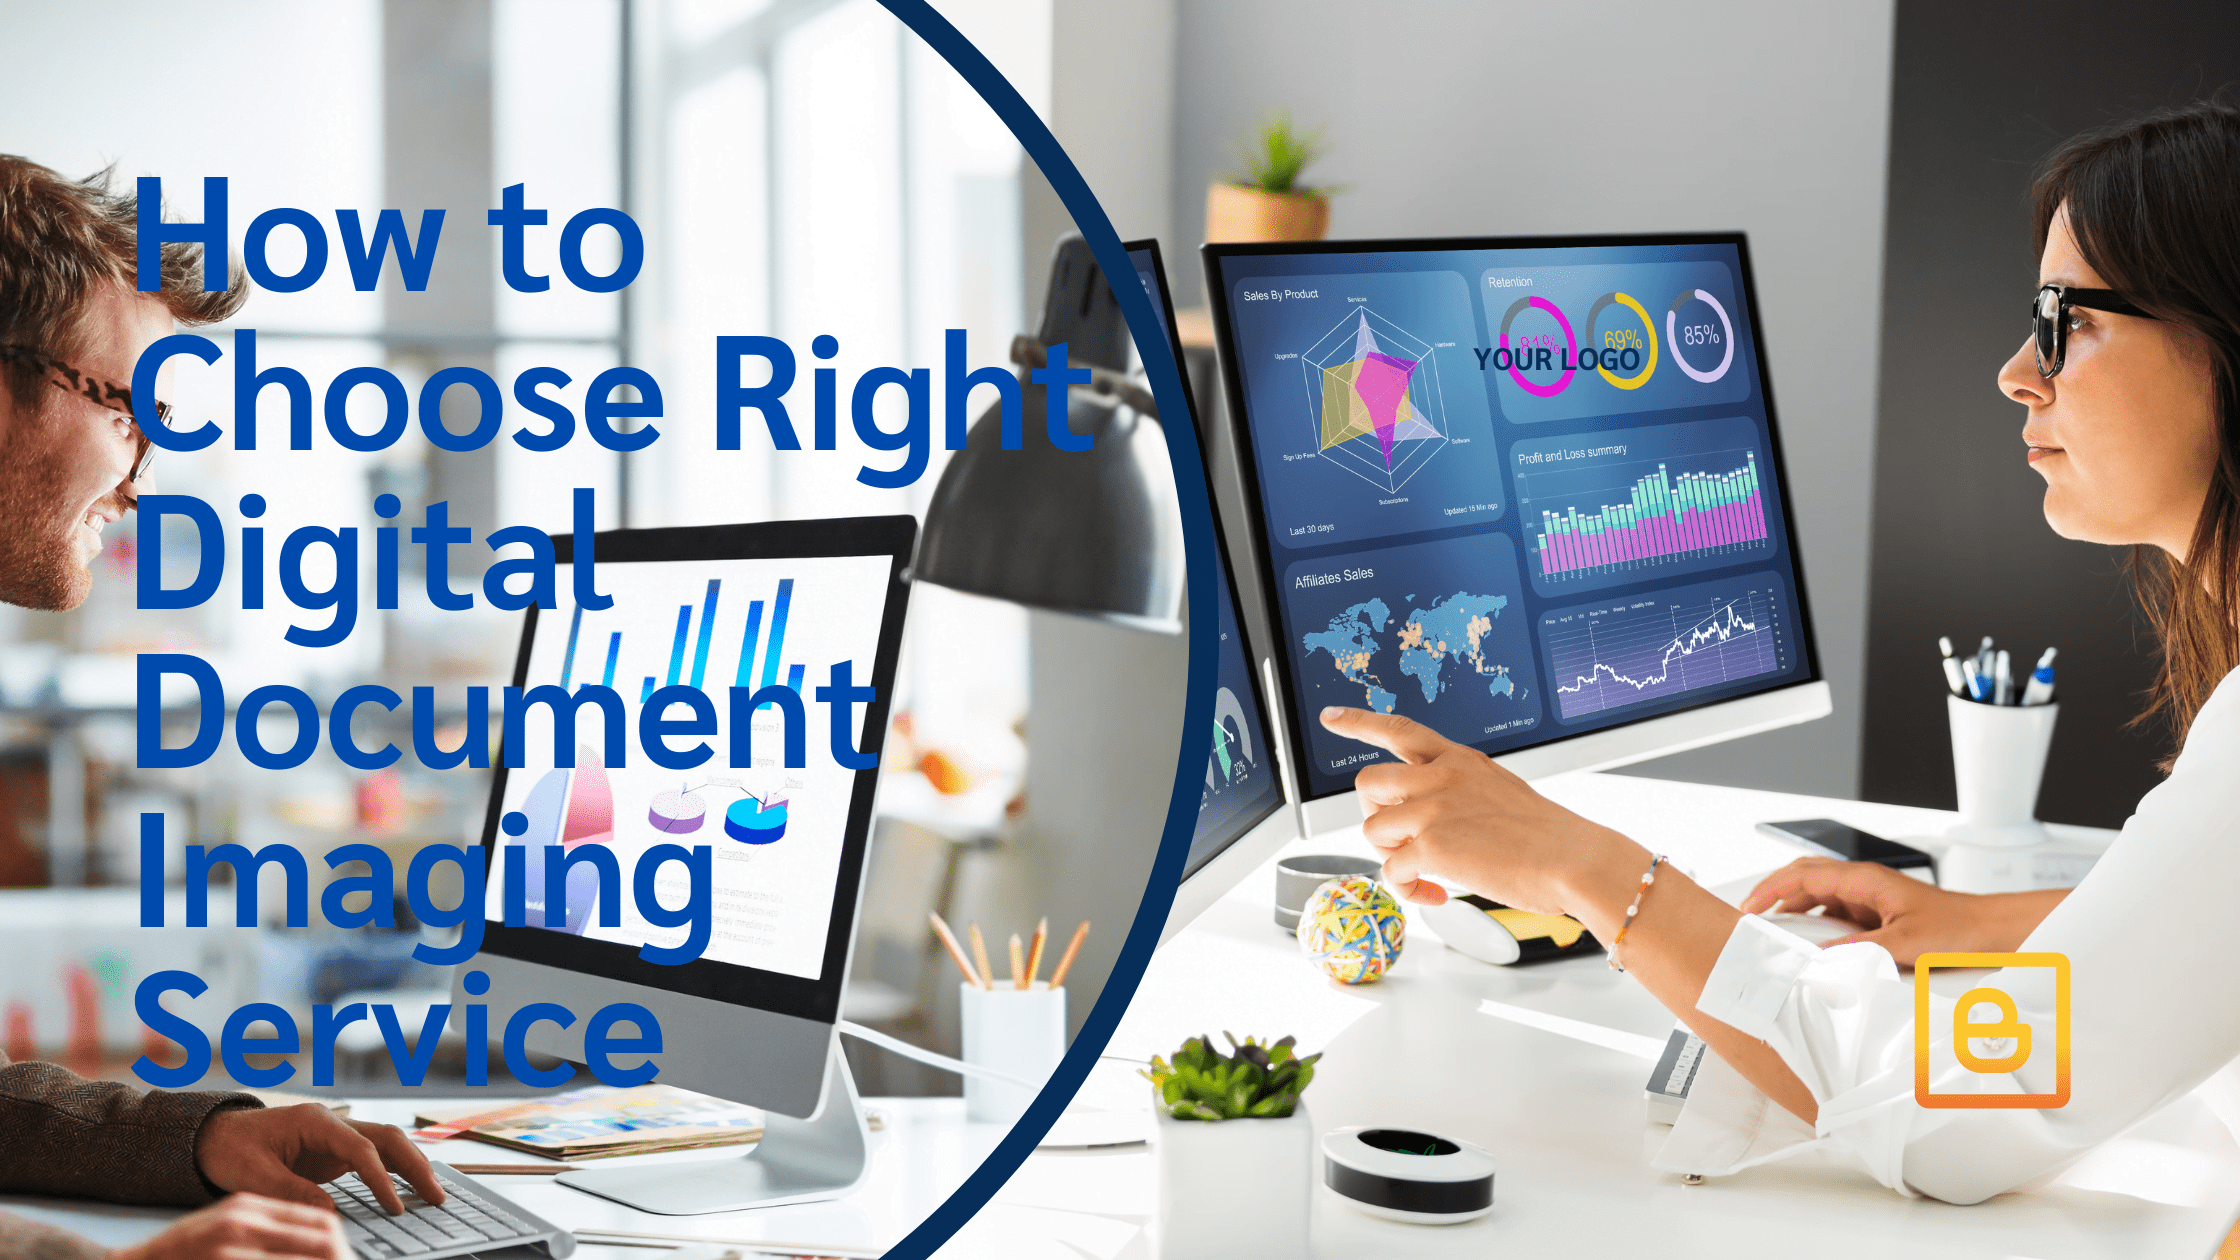 A Guide to Choose the Right Digital Document Imaging Service for Your Business